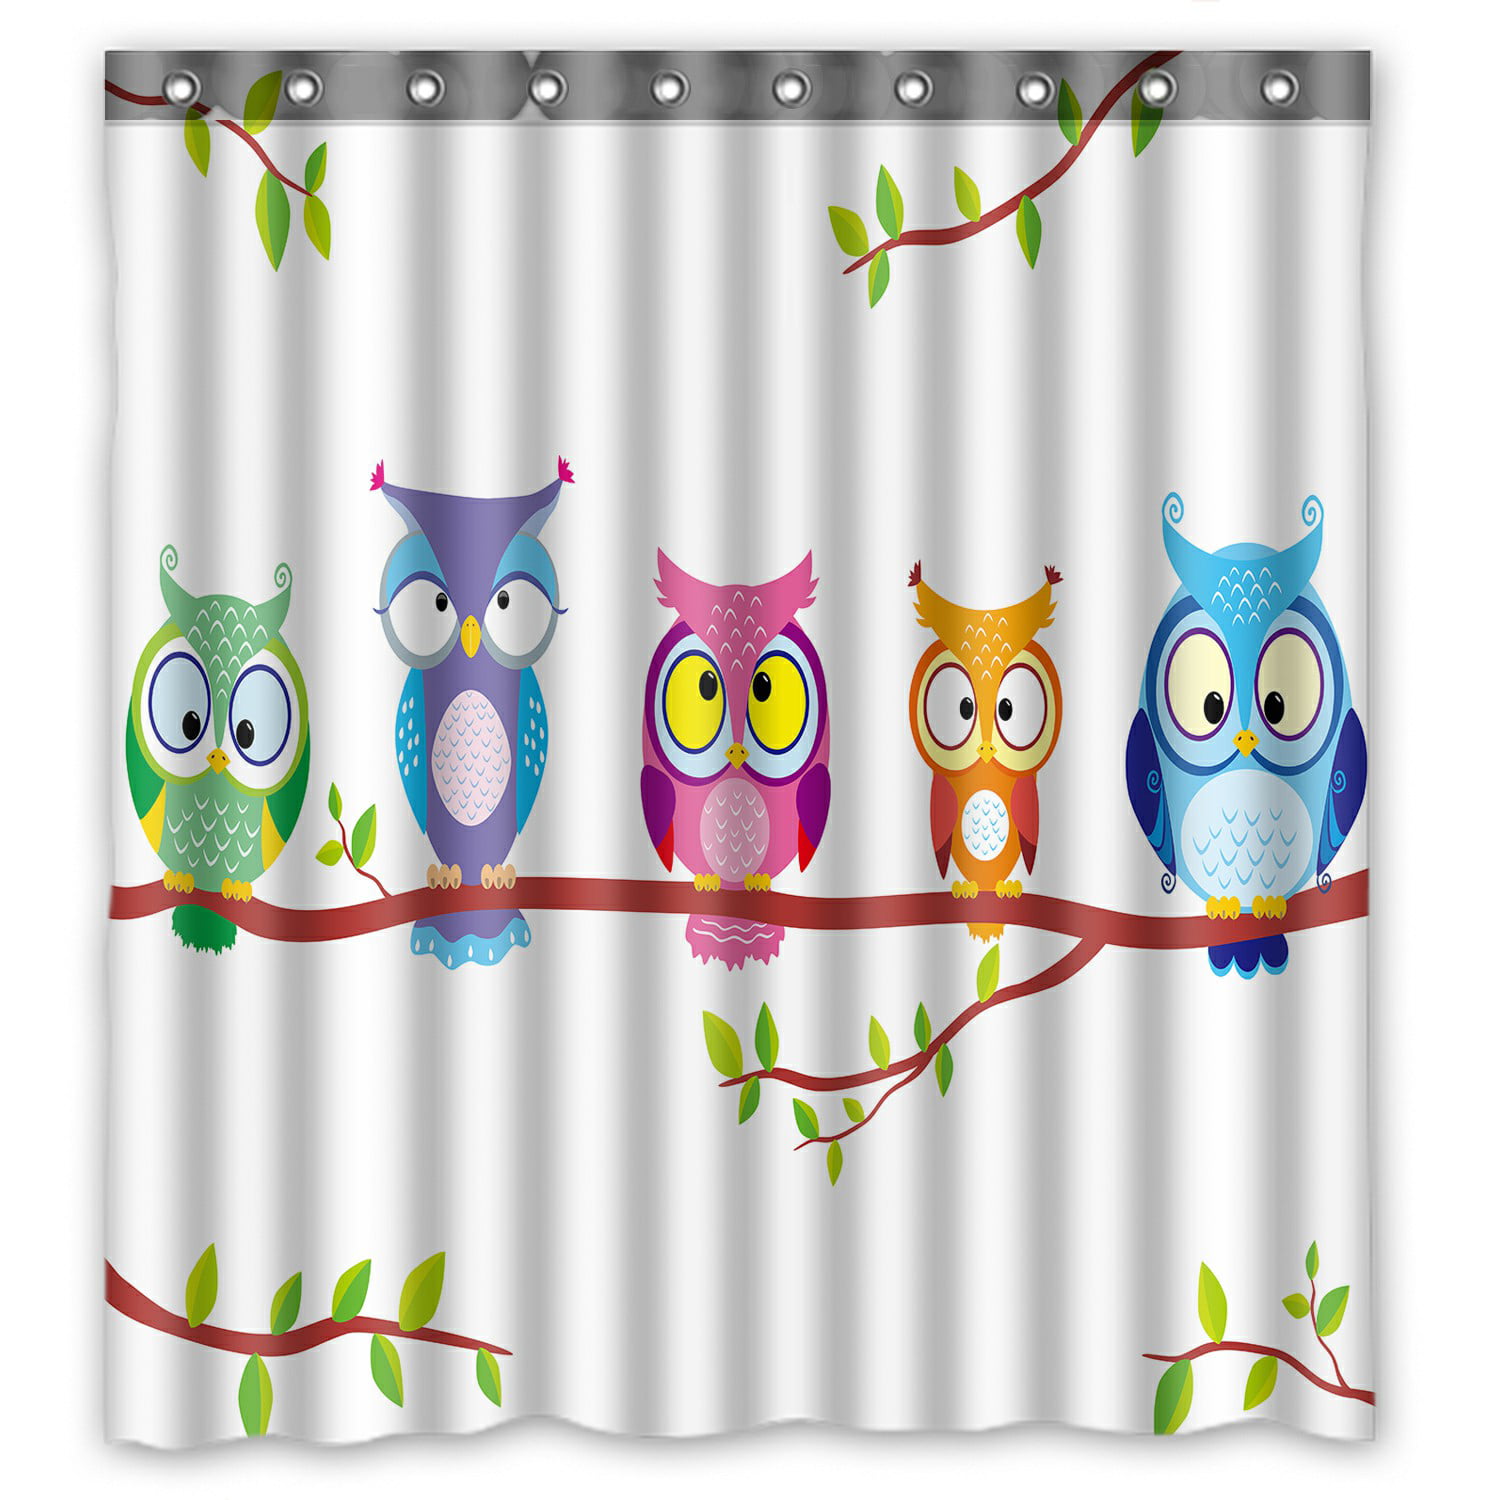 Cute Owl Lover At Branch Waterproof Fabric Shower Curtain Set Bathroom 71Inches 